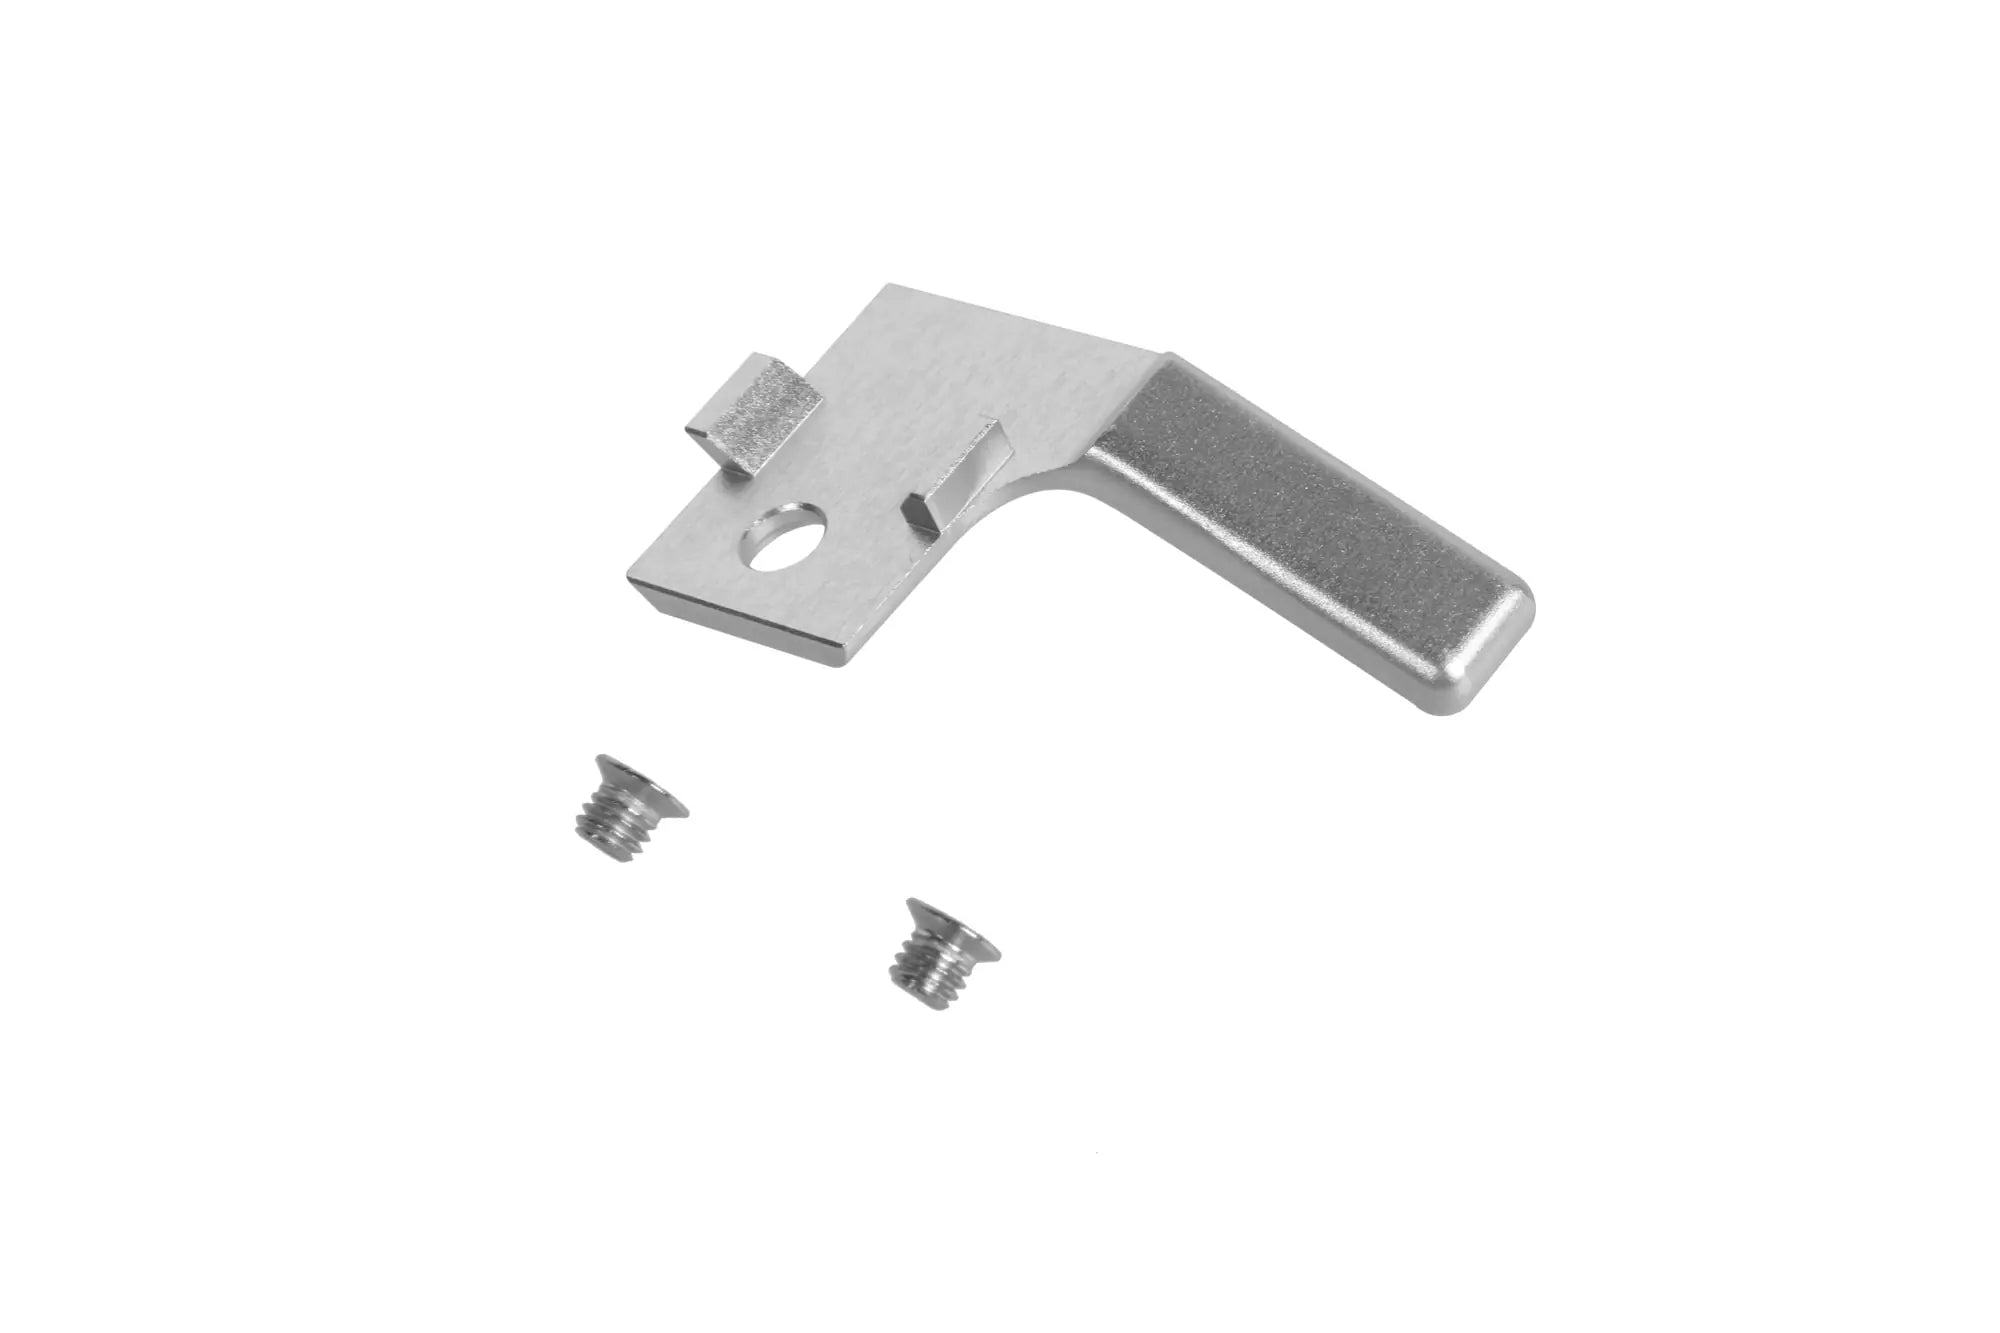 RAW CL reloading handle for Hi-Capa replicas (left) - Silver-1